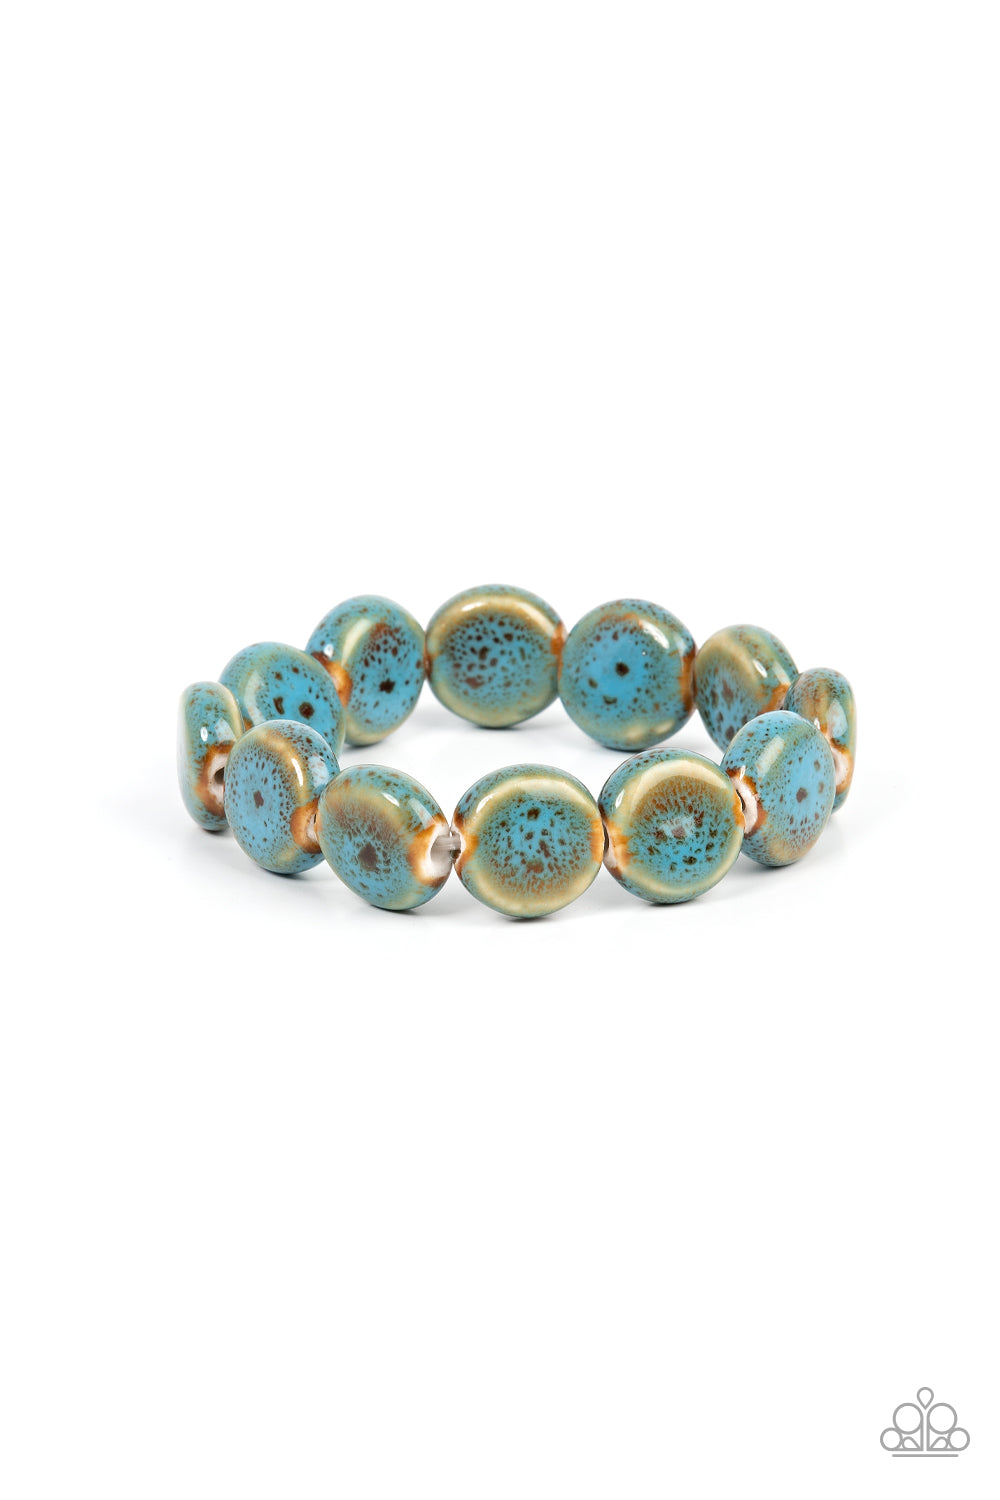 Paparazzi Accessories Earthy Entrada - Blue Stone Bracelets glazed in a distressed blue finish, an oversized collection of ceramic beads are threaded along a stretchy band around the wrist for a rustic fashion.  Sold as one individual bracelet.